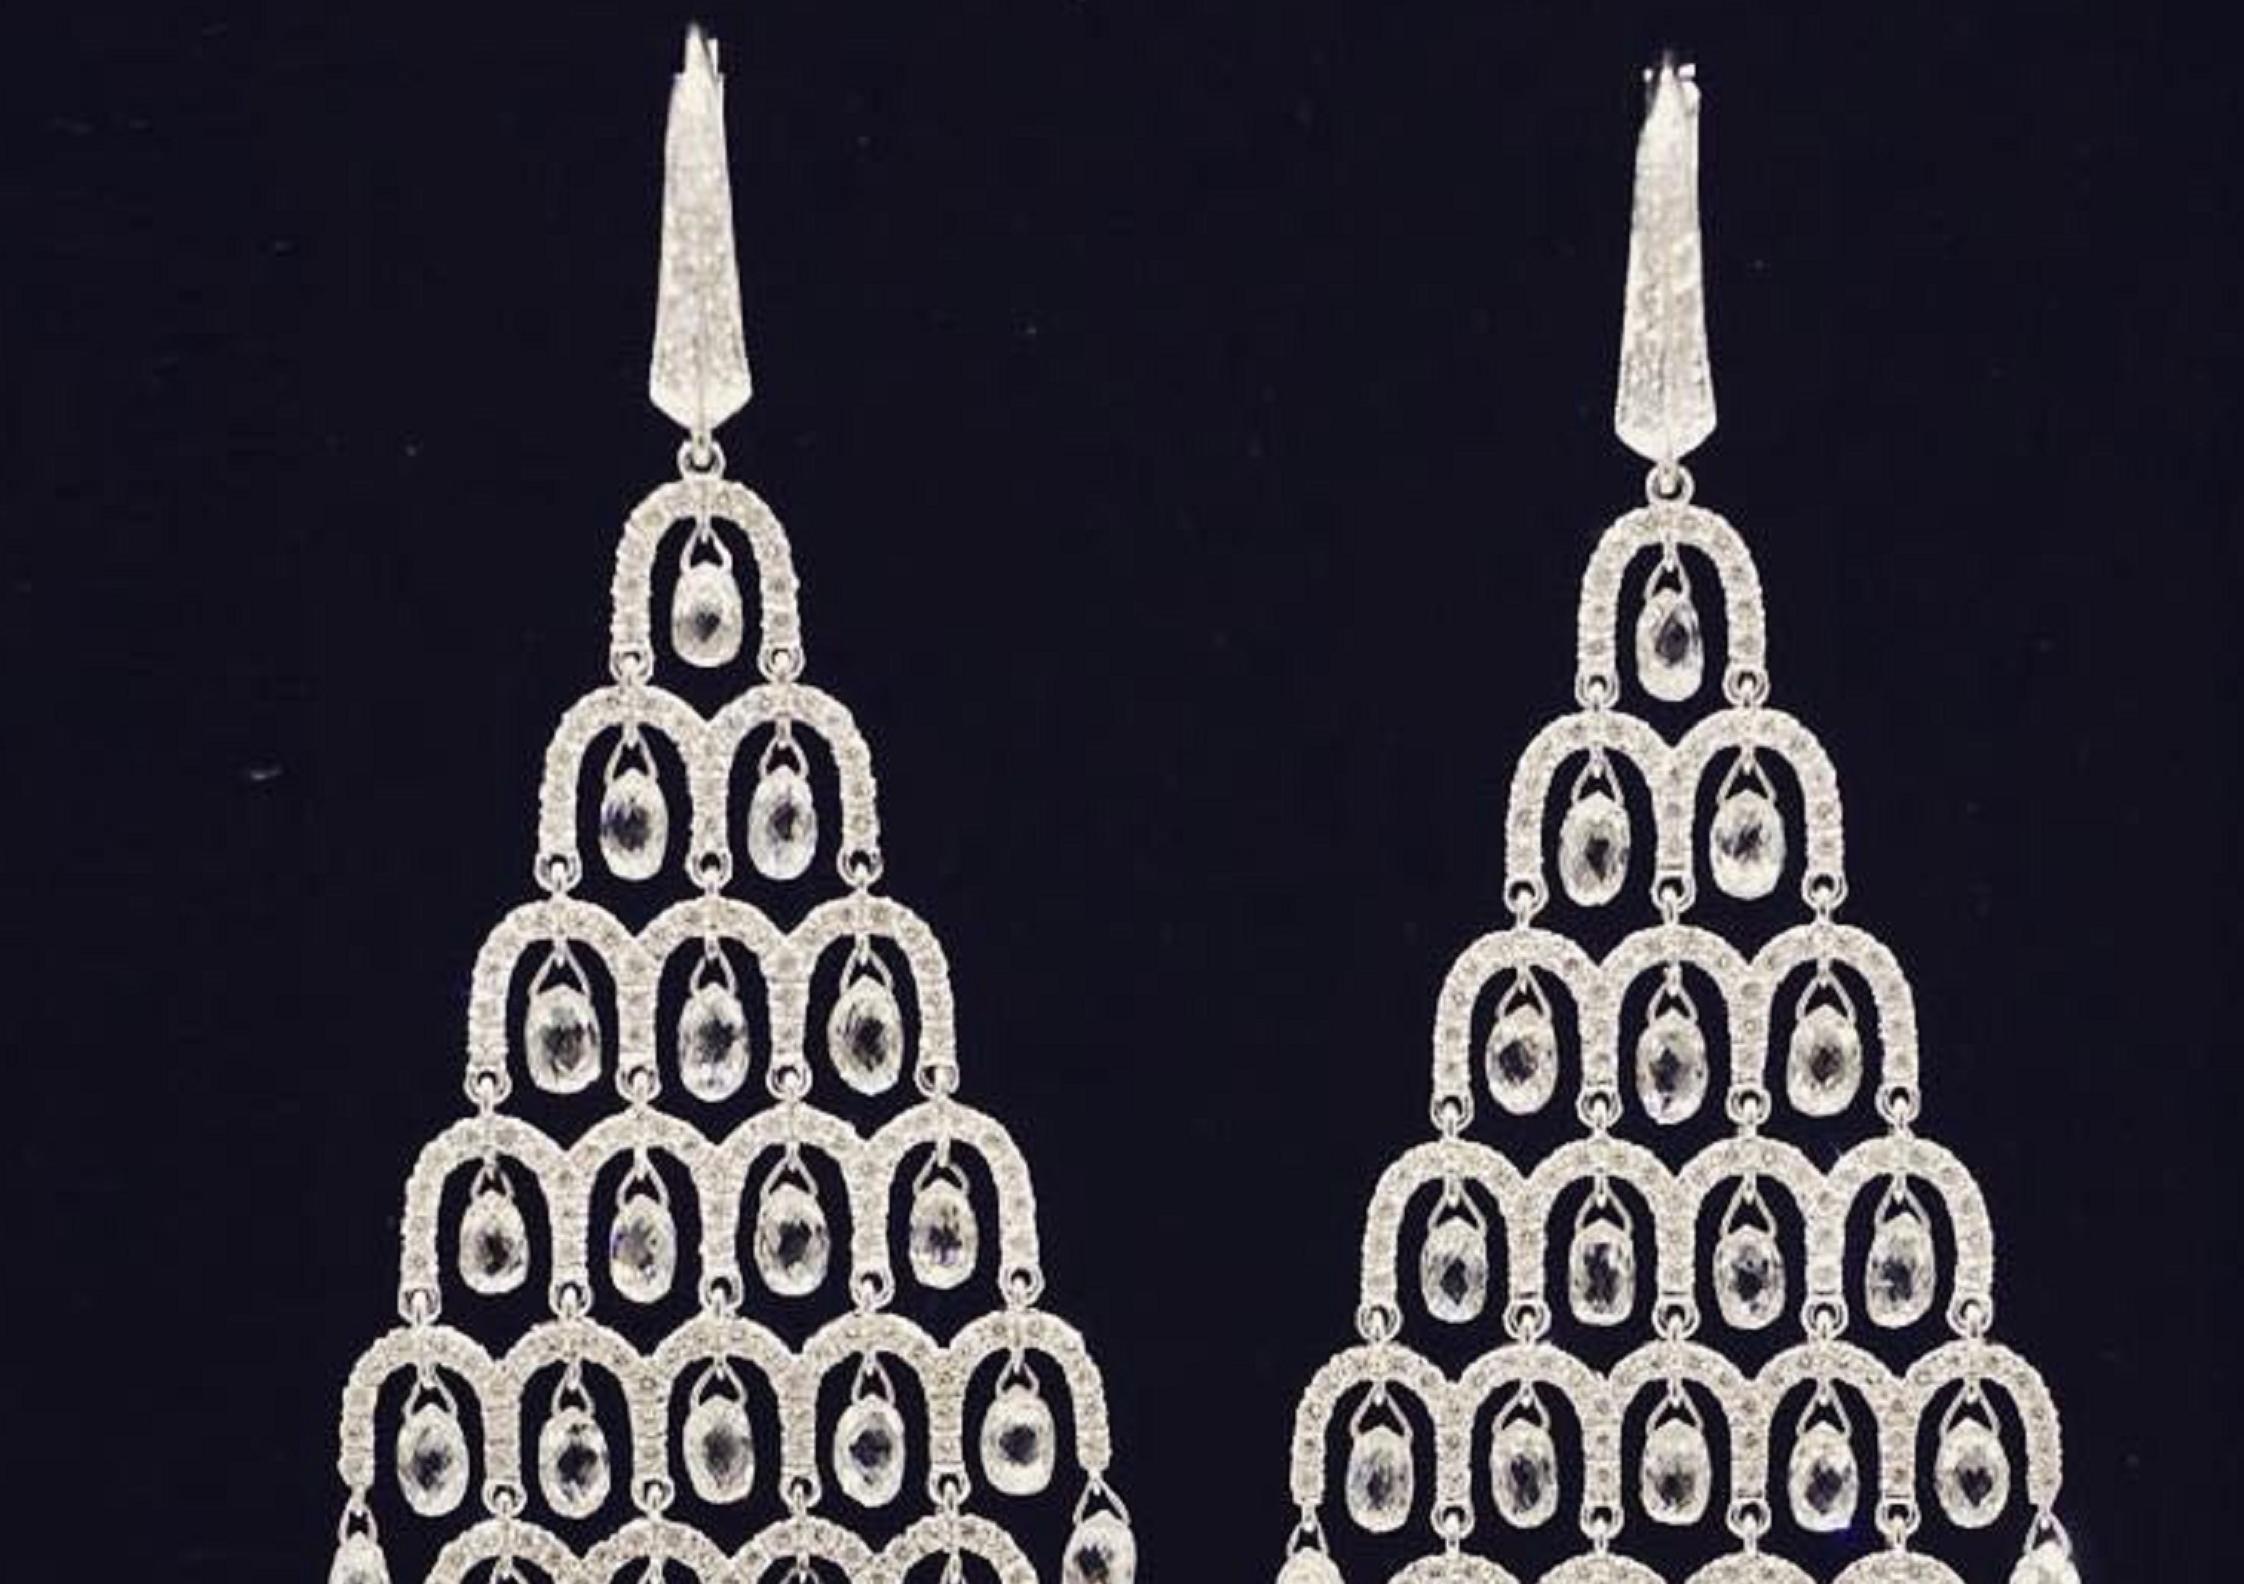 PANIM Diamond Briolette Chandelier 18K White Gold Chandelier Earrings

Presenting an amazing long chandelier earrings of enticing and favorite drop shaped diamond briolettes earrings approximately 10cts in 18K White Gold with ascending rows from 1